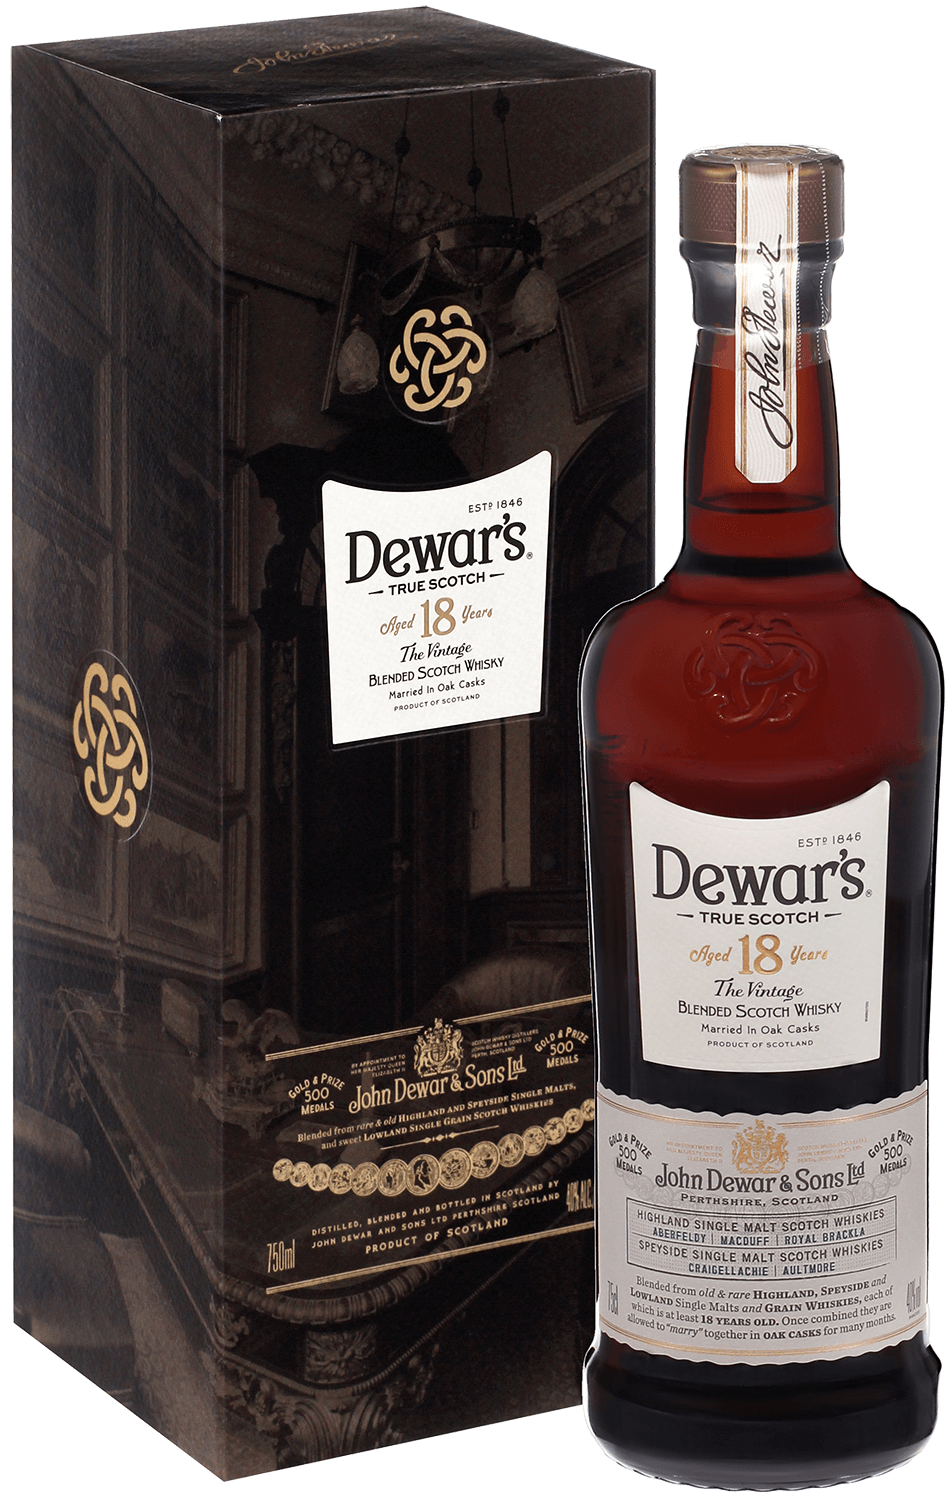 Dewar's Founders Reserve 18 y.o. Blended Scotch Whisky (gift box)